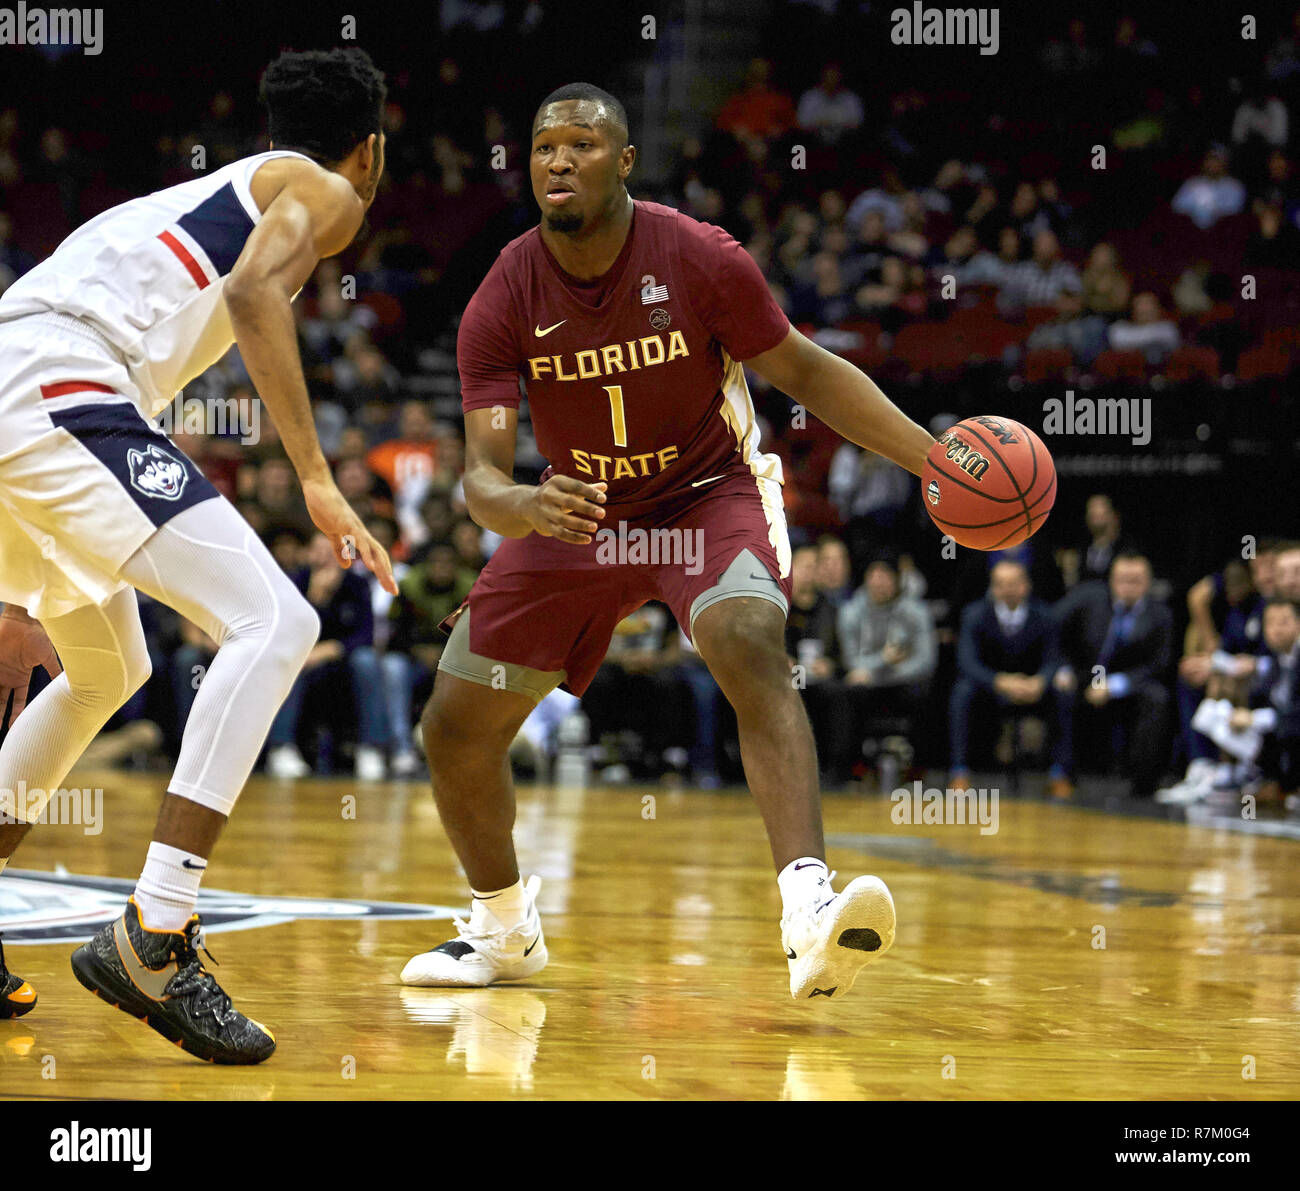 Newark, New Jersey, USA. 8th Dec, 2018. Florida State Seminoles forward Raiquan Gray (1) during the Never Forget Tribute Classic between the Florida State Seminoles and the UConn Huskies at the Prudential Center in Newark, New Jersey. Florida State defeated UConn 82-71. Duncan Williams/CSM/Alamy Live News Stock Photo